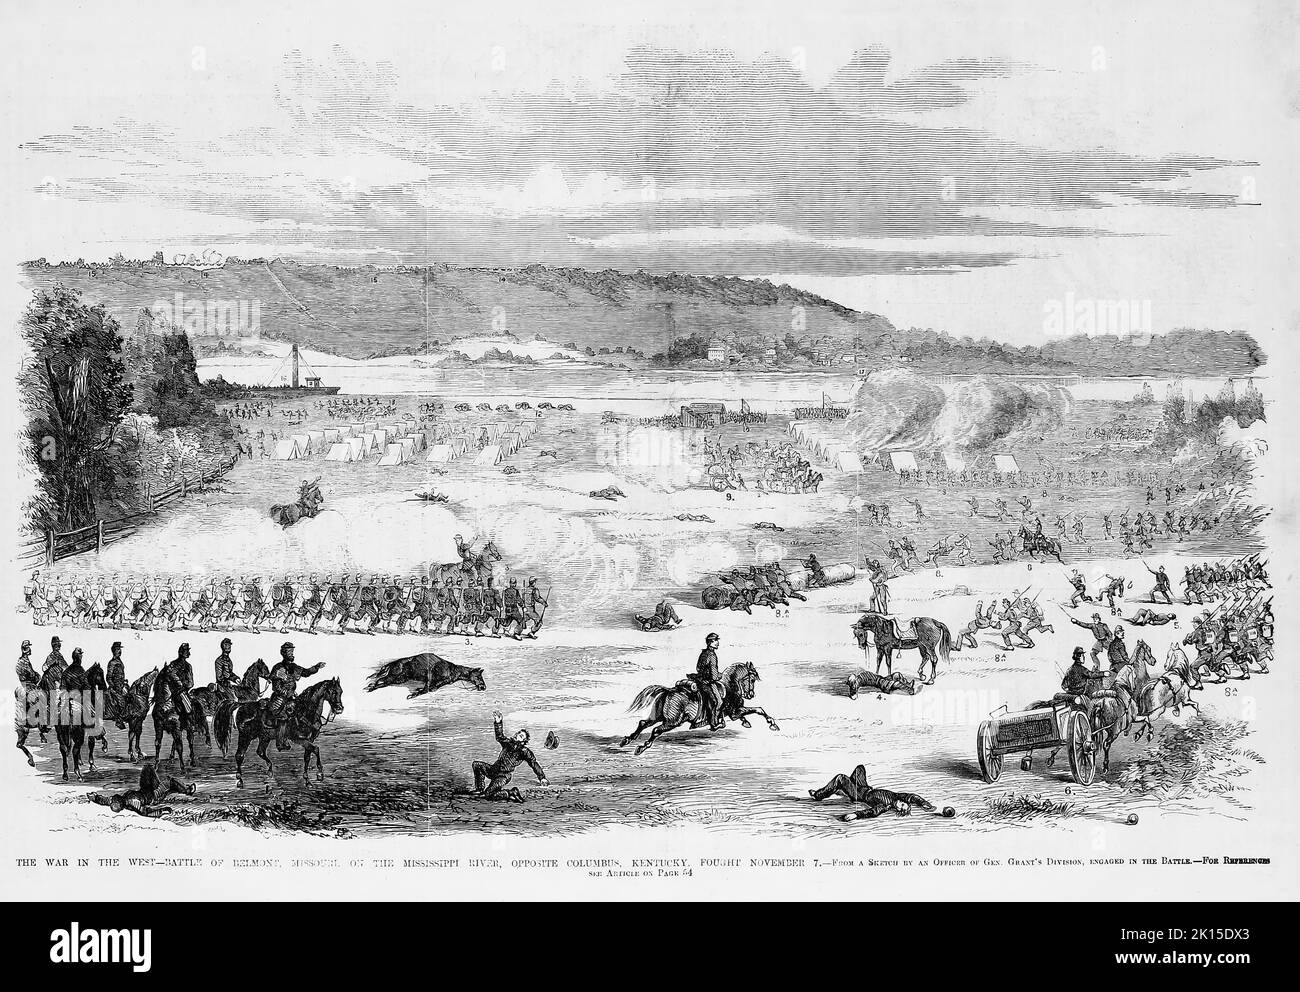 The War in the West - Battle of Belmont, Missouri, on the Mississippi River, opposite Columbus, Kentucky, fought November 7th, 1861. 19th century American Civil War illustration from Frank Leslie's Illustrated Newspaper Stock Photo